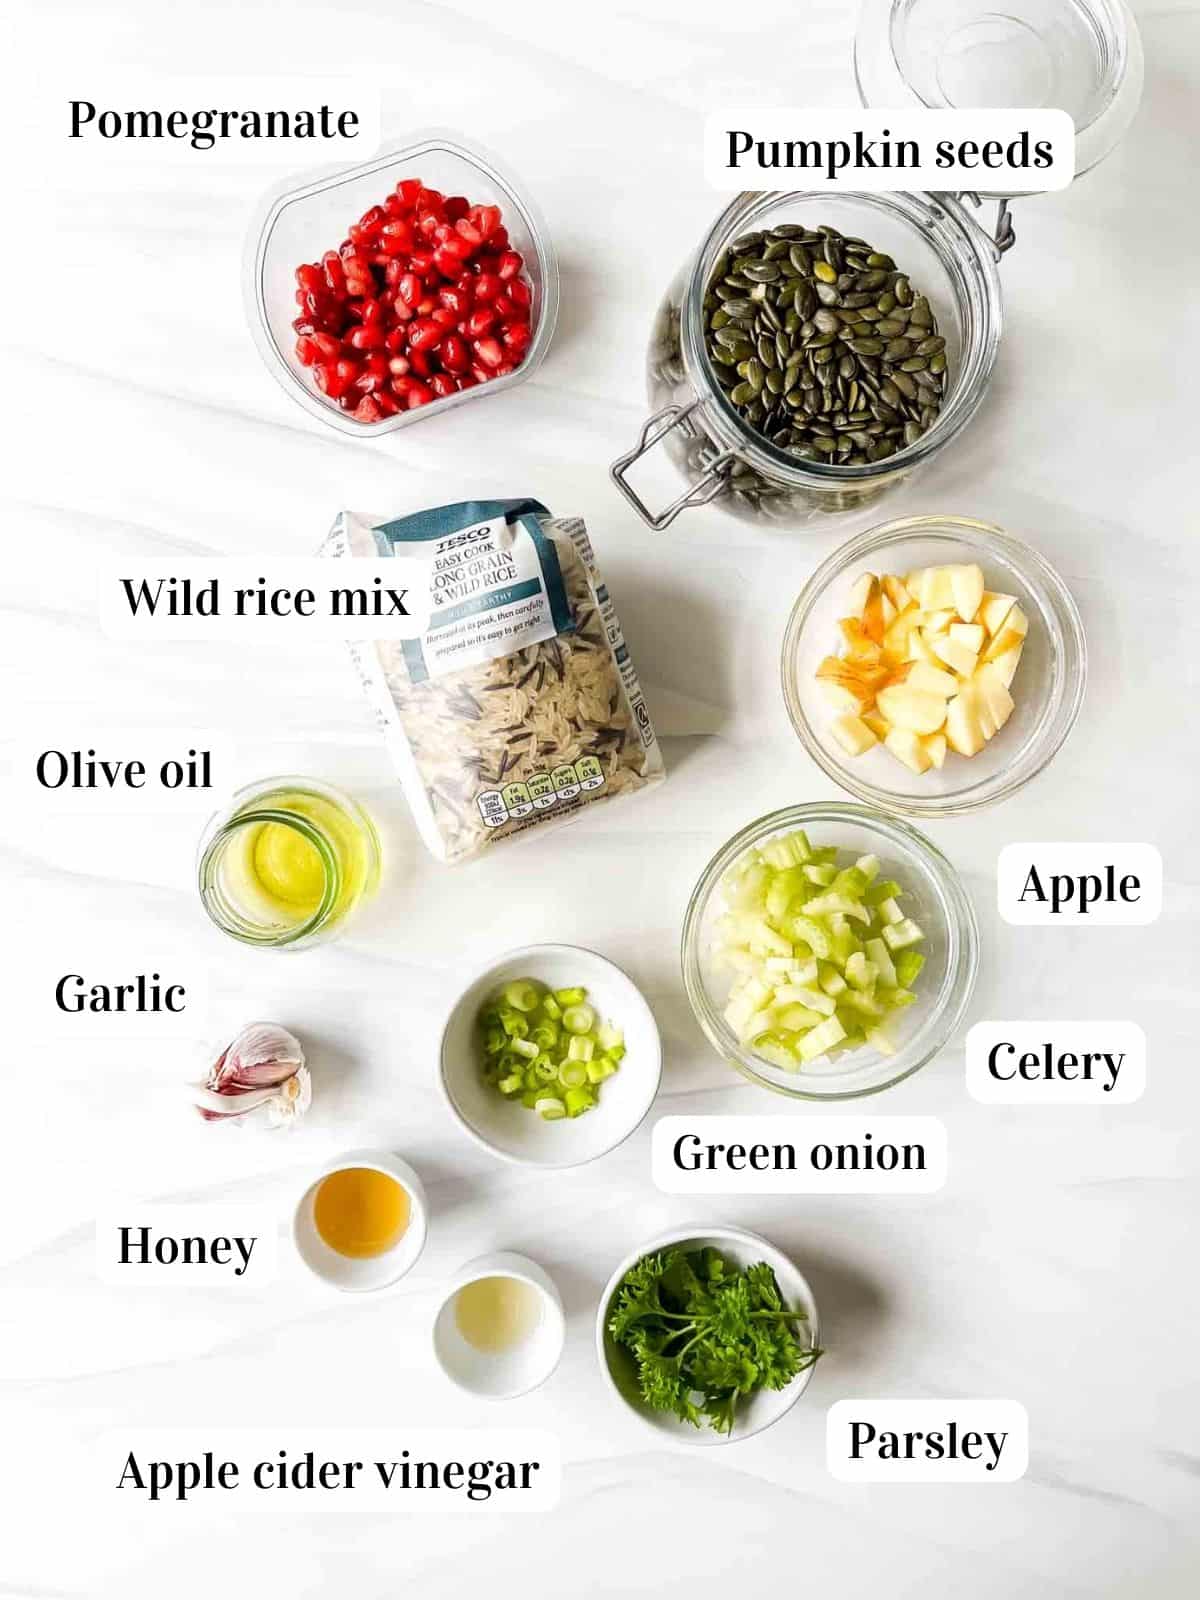 individually labelled ingredients to make summer wild rice salad including pomegranate seeds, apple, celery and pumpkin seeds.